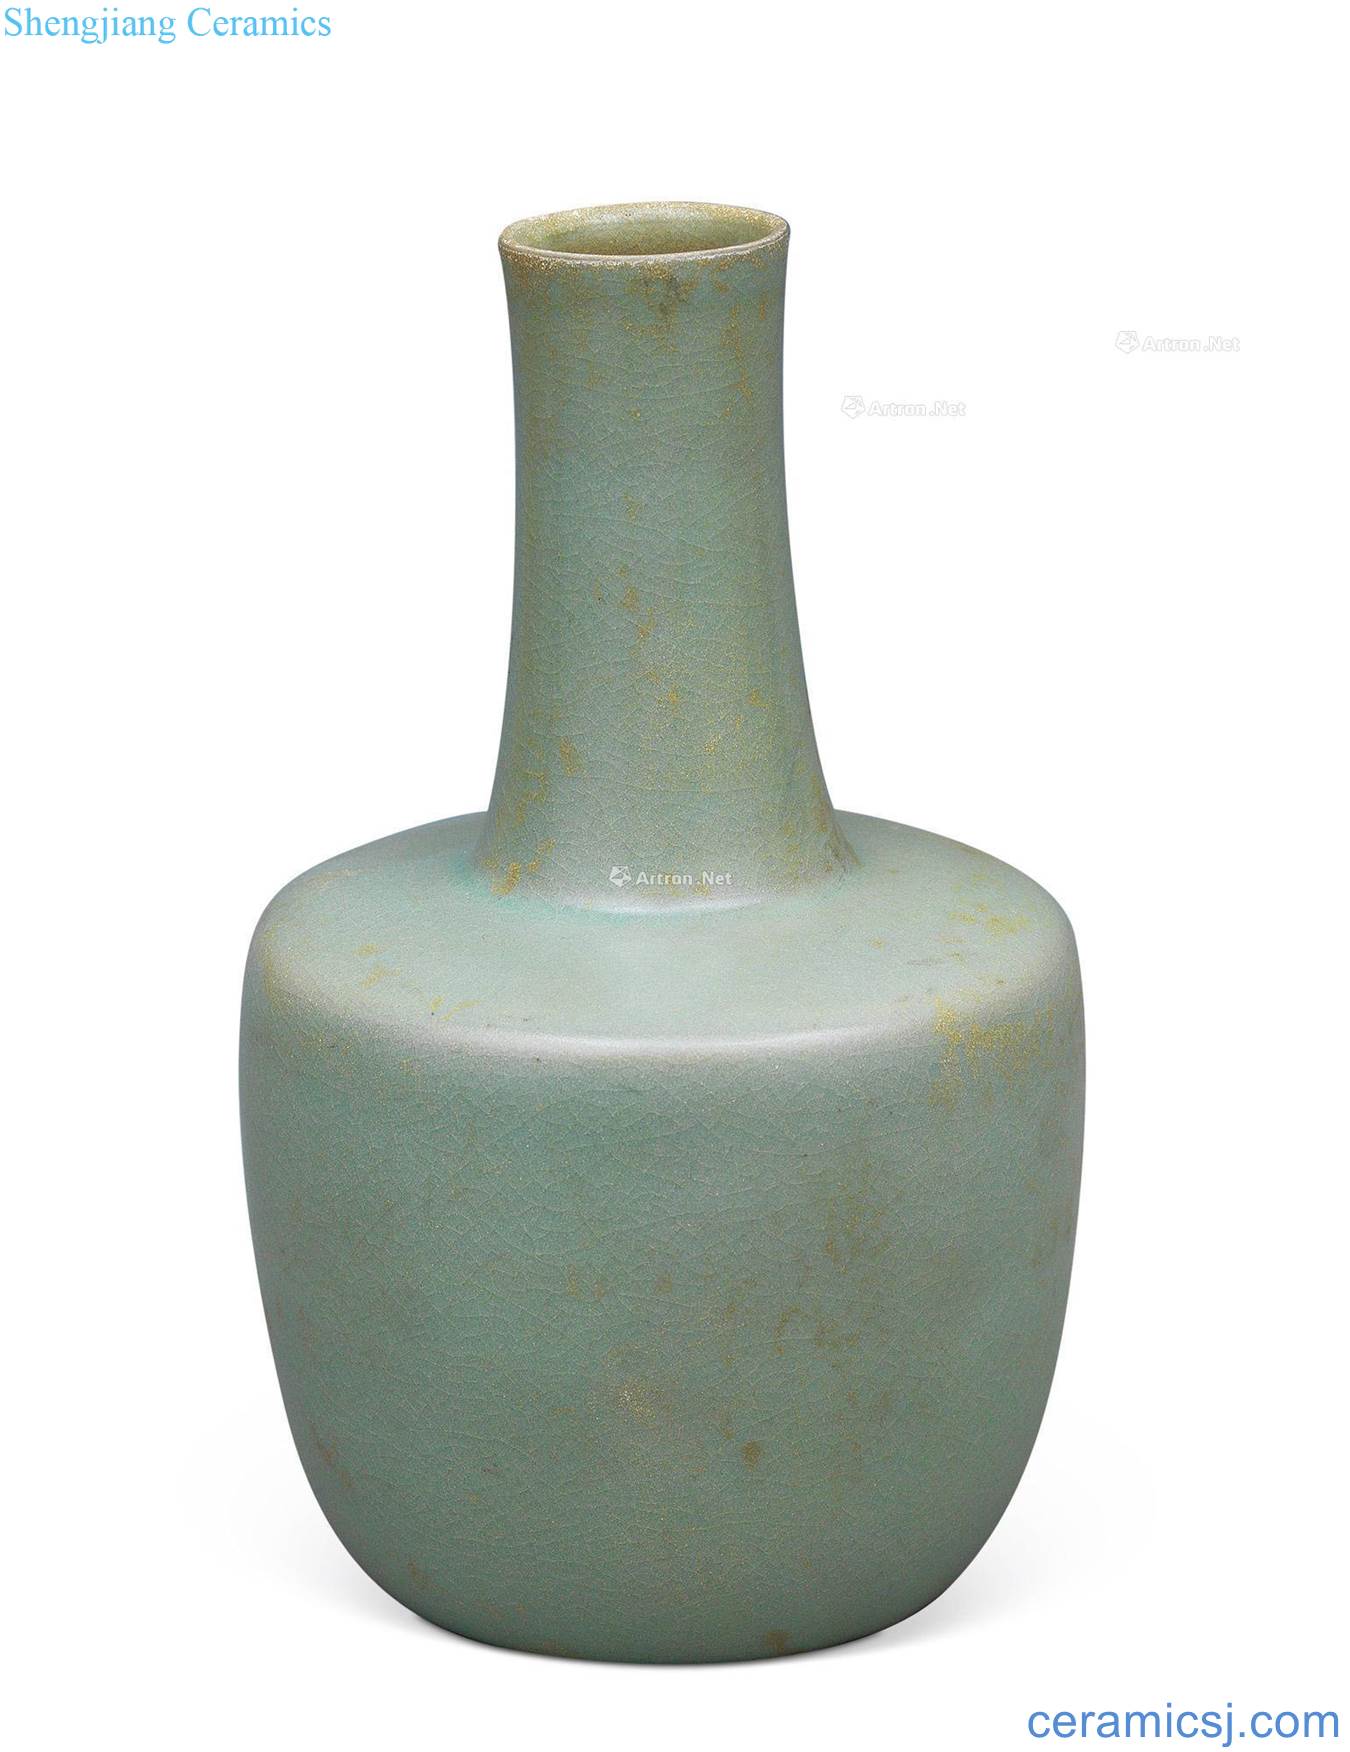 Northern song dynasty Your kiln flask